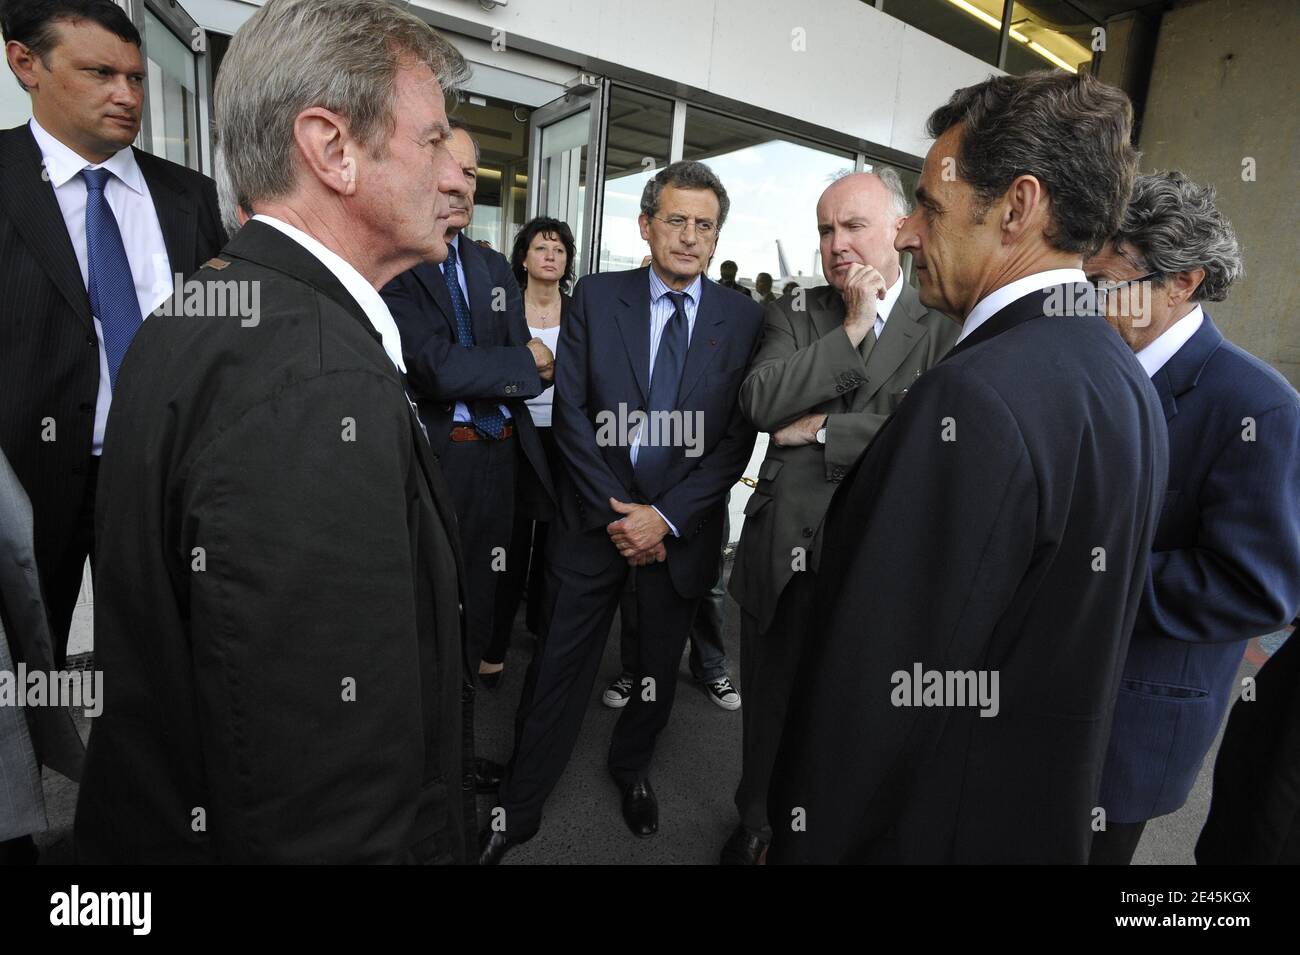 French president Nicolas Sarkozy flanked by French Minister of Foreign and European Affairs Bernard Kouchner, Environment Minister Jean-Louis Borloo, Junior Minister for Transport Dominique Bussereau speaks to Air France-KLM group chairman and CEO Jean-Cyril Spinetta and French airline company Air France general director Pierre-Henri Gourgeon (no seen) at the Charles-de-Gaulle airport in Roissy, northern suburb of Paris on June 1, 2009 after an Air France passenger jet with 228 people on board dropped off radar over the Atlantic ocean off the Brazilian coast. Air traffic control lost contact w Stock Photo